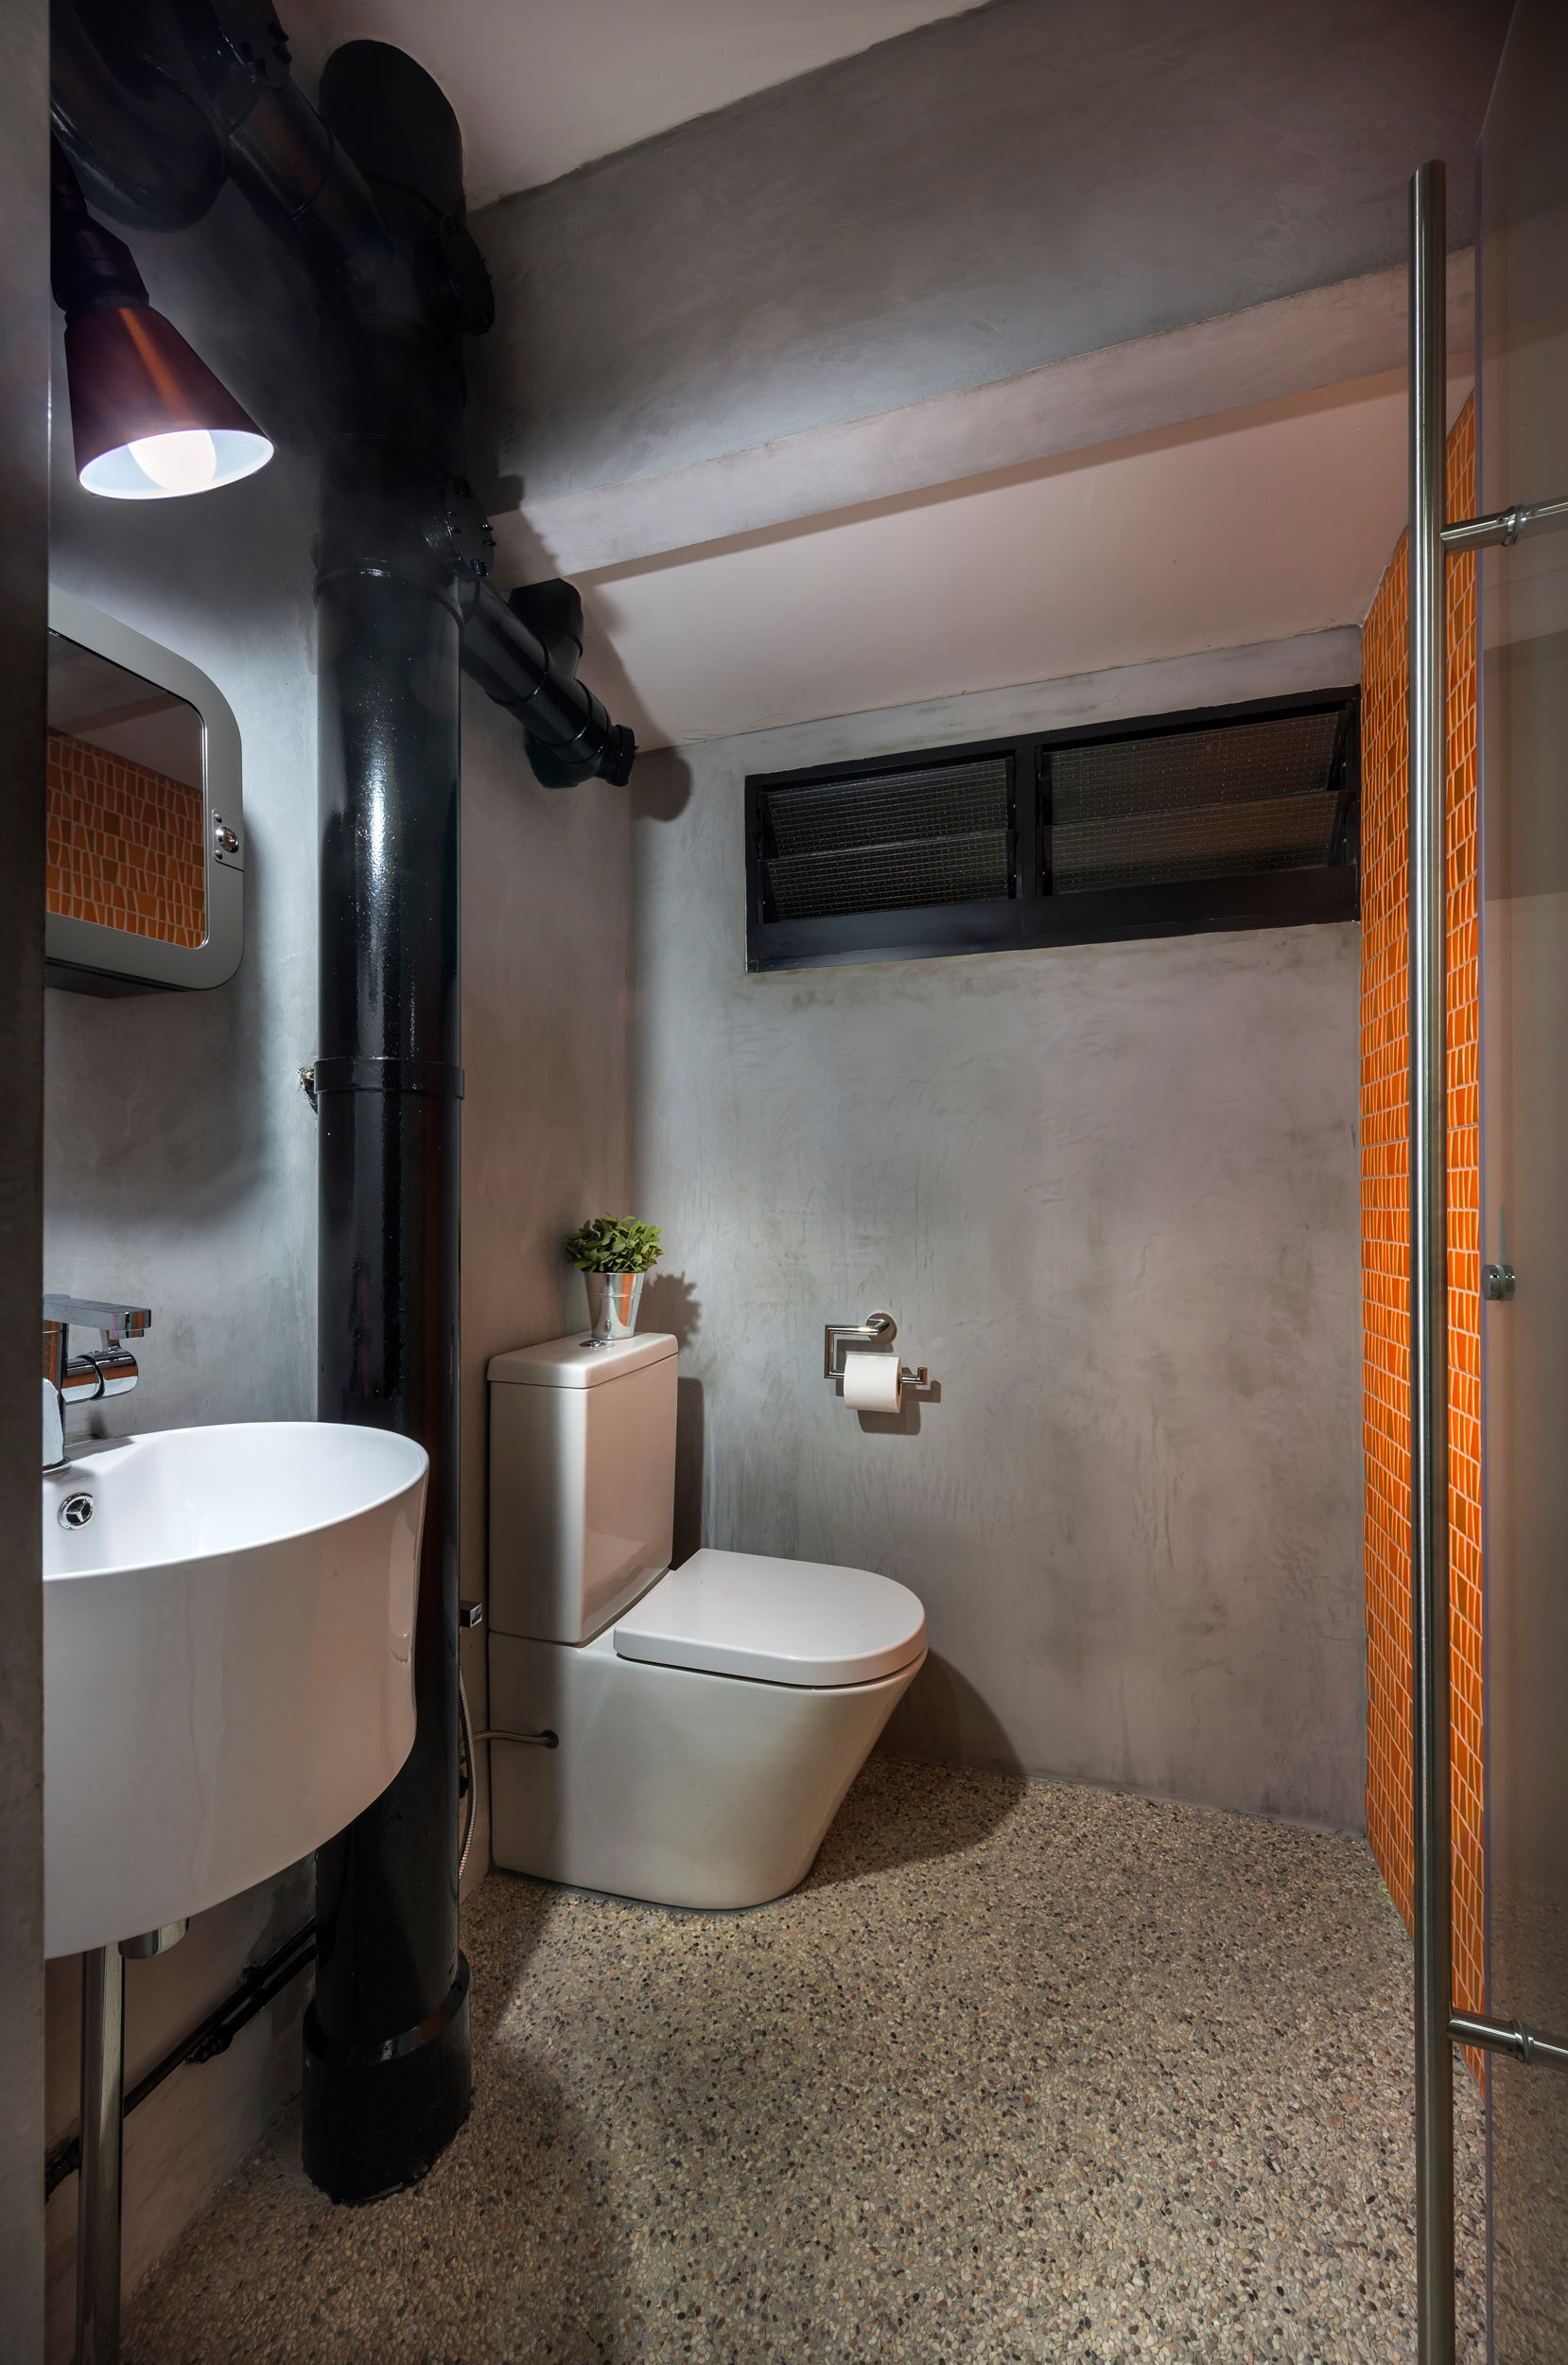 toilet design hdb ang mo kio avenue 1 industrial bathroom singapore by home guide design contracts pte ltd houzz